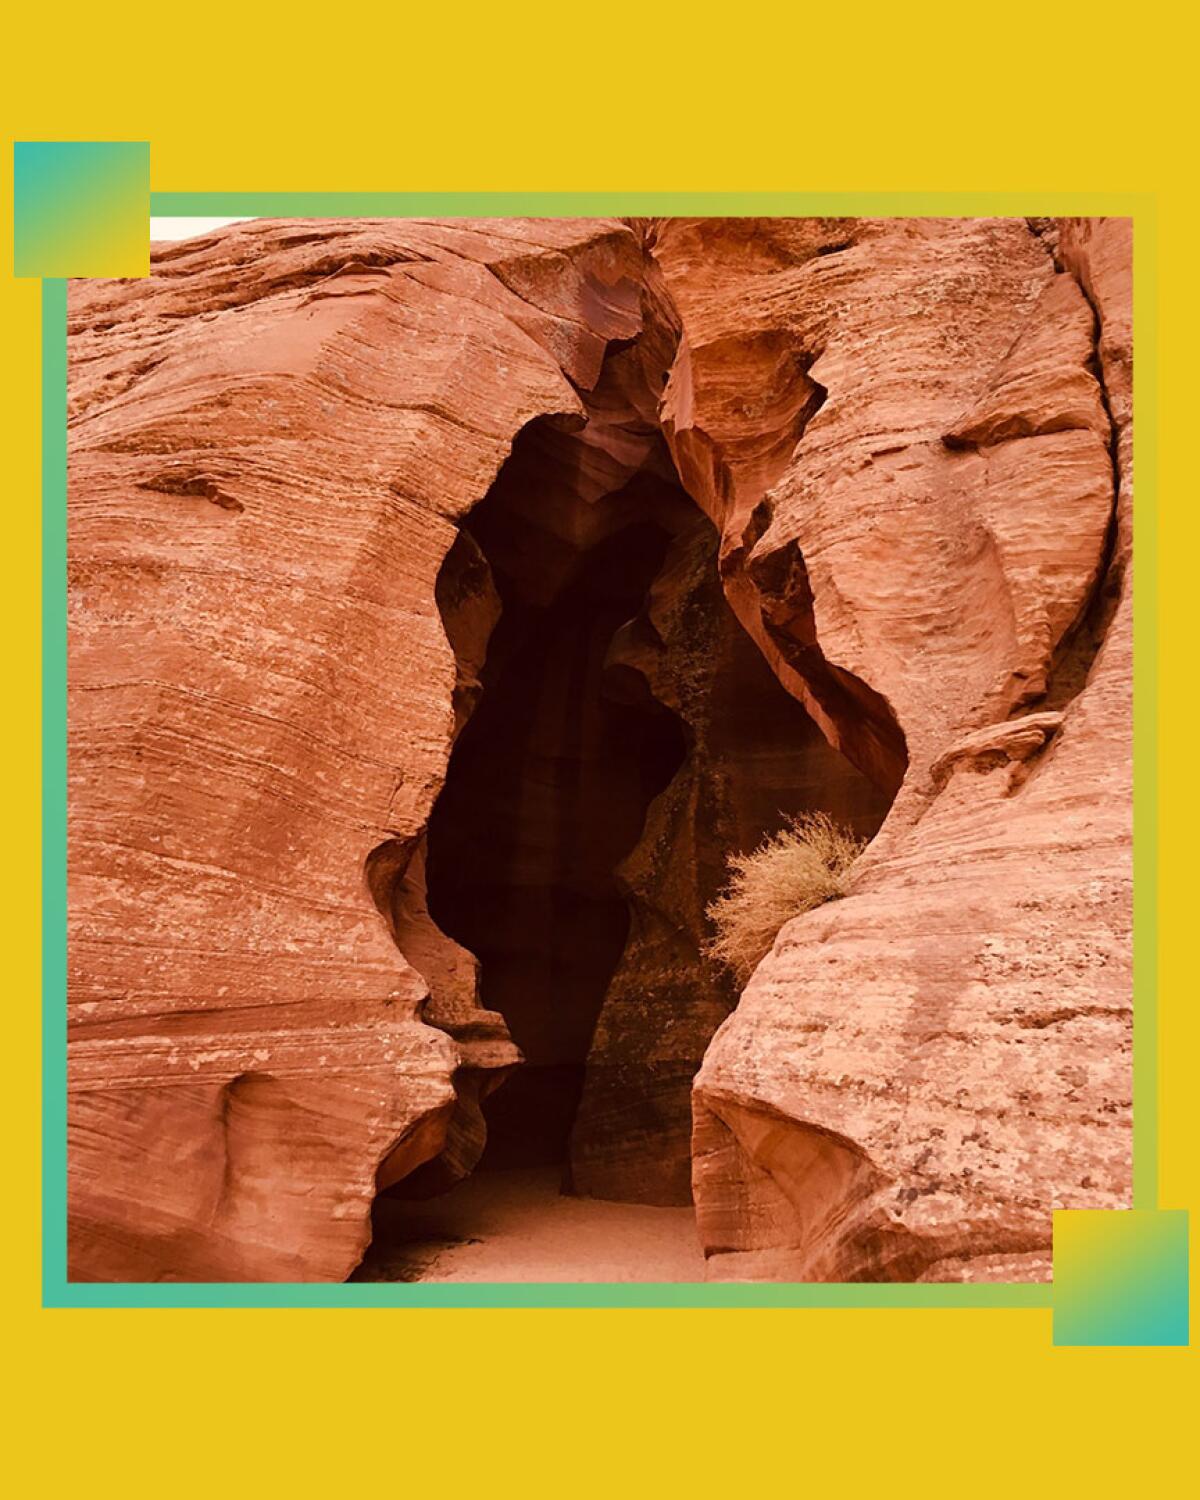 The sandstone walls of a slot canyon.